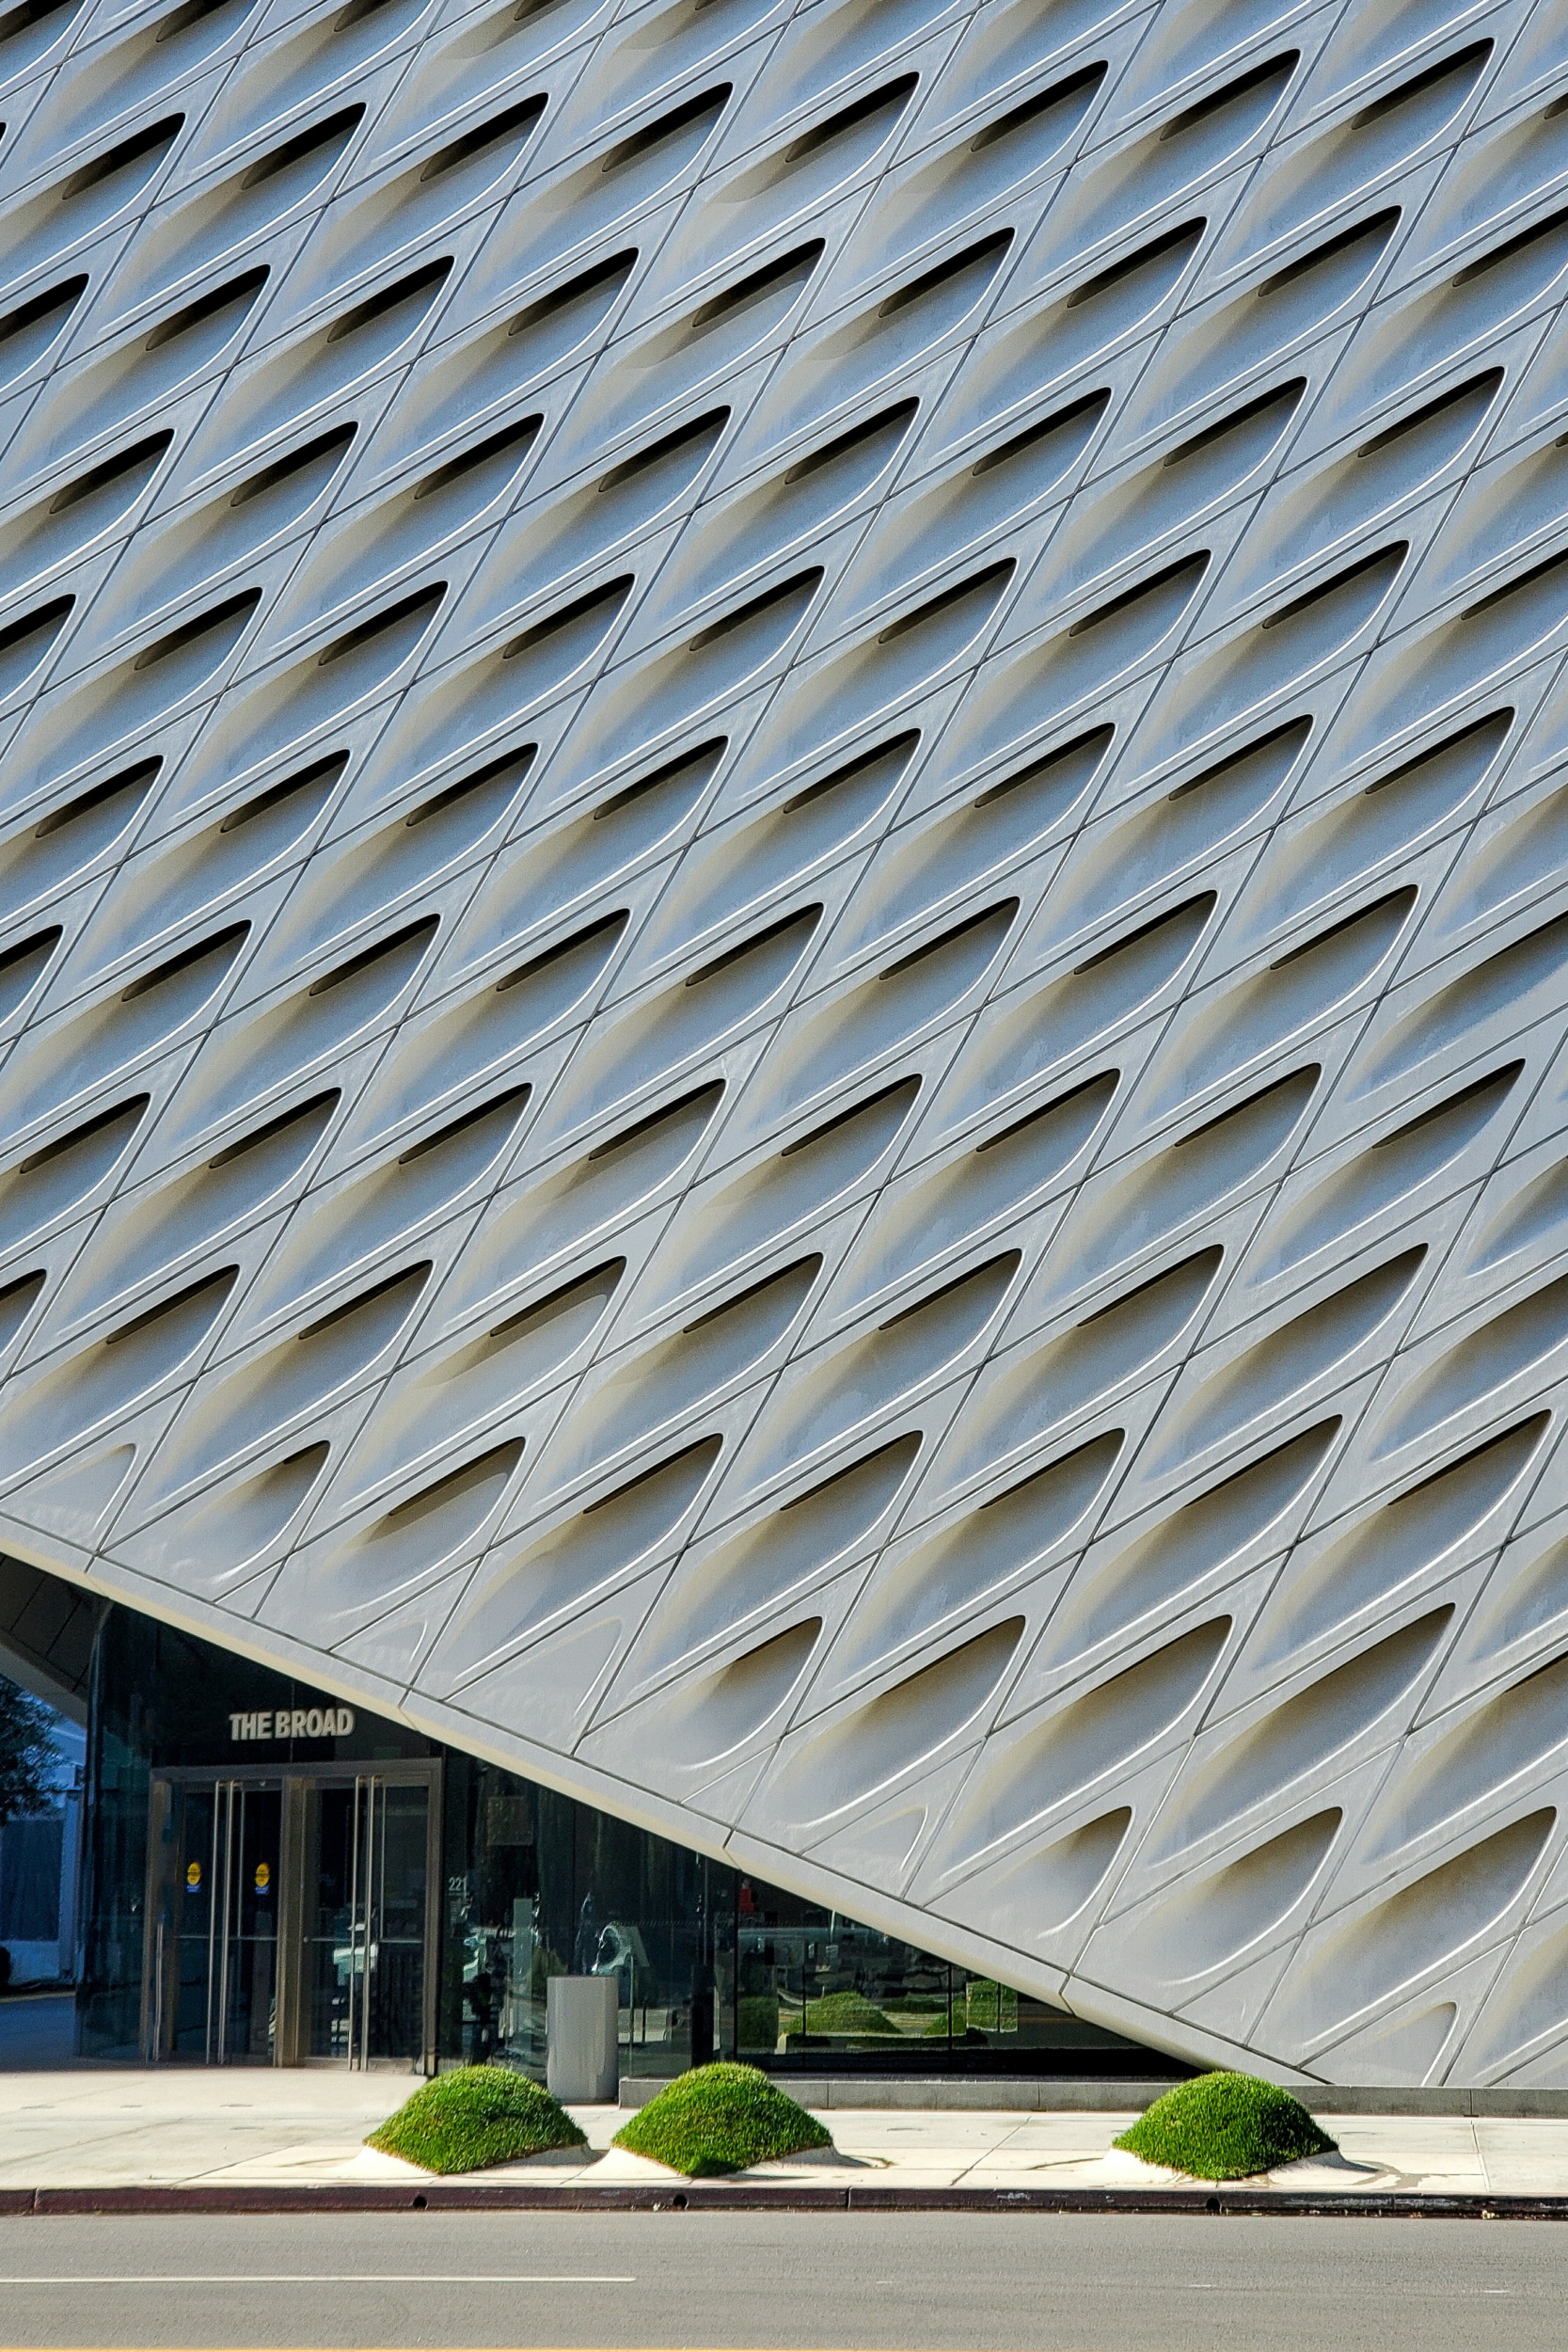 The BROAD